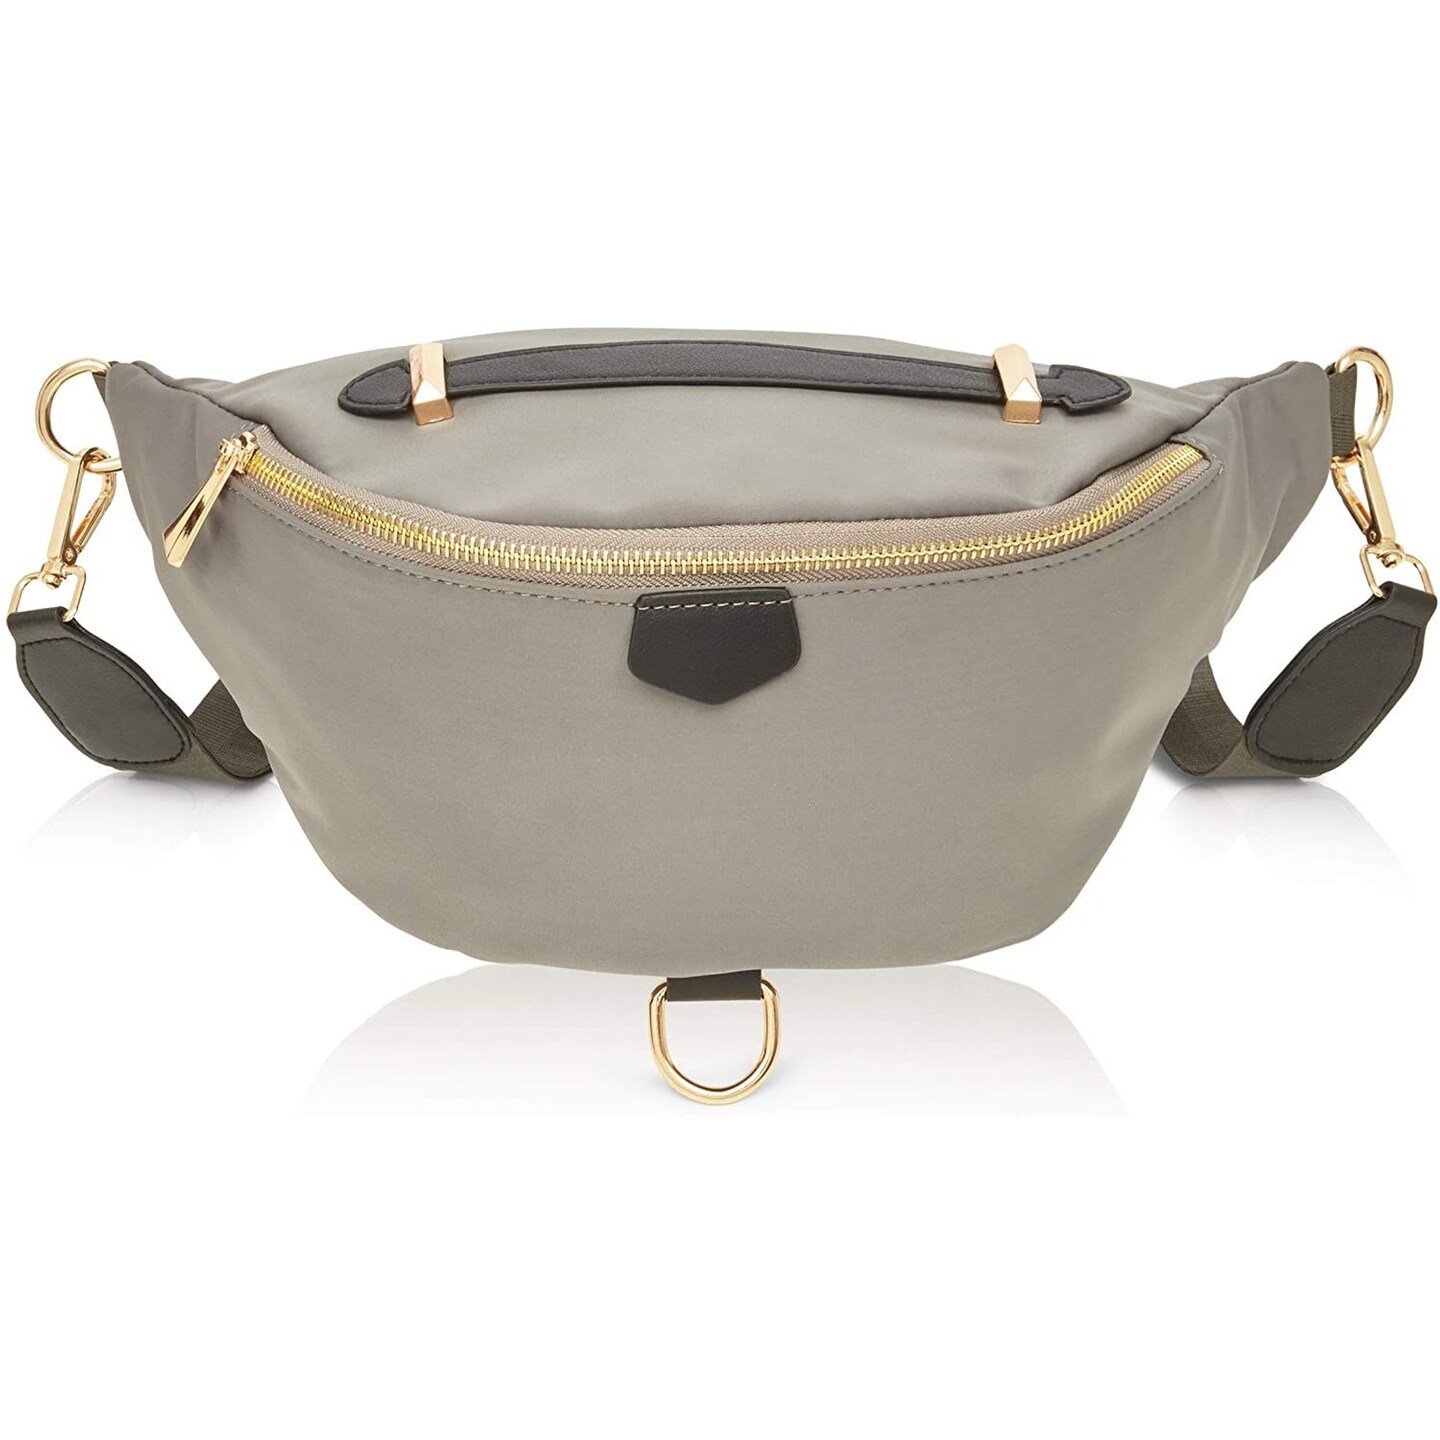 Large Leather Body Bag Fanny Pack Bum Bag Close to Body Bag 